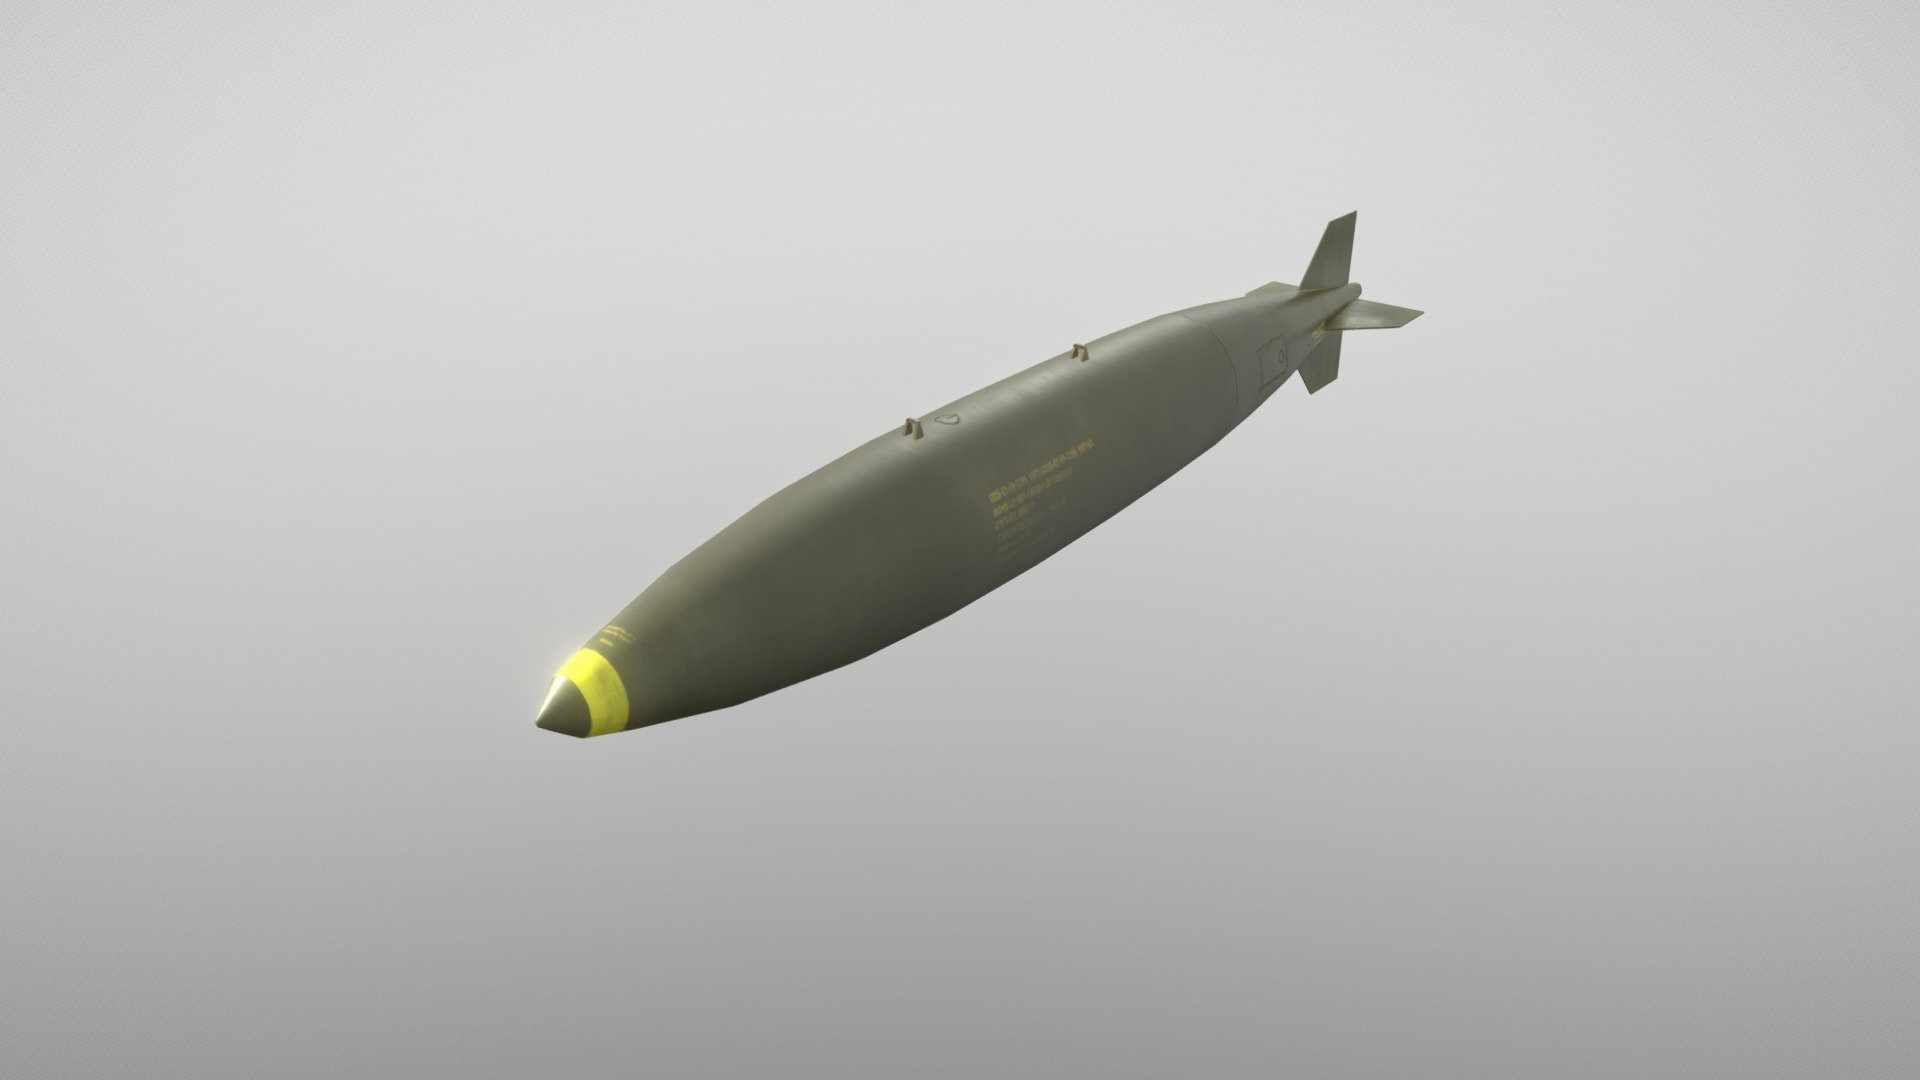 =&gt;Model is in .blend, .fbx, .obj.

=&gt;Mesh has fully unwrapped UVs.

=&gt;1024x1024 .png textures.

=&gt;Includes BaseColor, Metallic, Roughness and Normal textures.

The Mark 84 or BLU-117[2] is an American general-purpose bomb. It is the largest of the Mark 80 series of weapons. Entering service during the Vietnam War, it became a commonly used US heavy unguided bomb (due to the amount of high-explosive content packed inside) to be dropped. At the time, it was the third largest bomb by weight in the US inventory behind the 15,000-pound (6,800 kg) BLU-82 &ldquo;Daisy Cutter